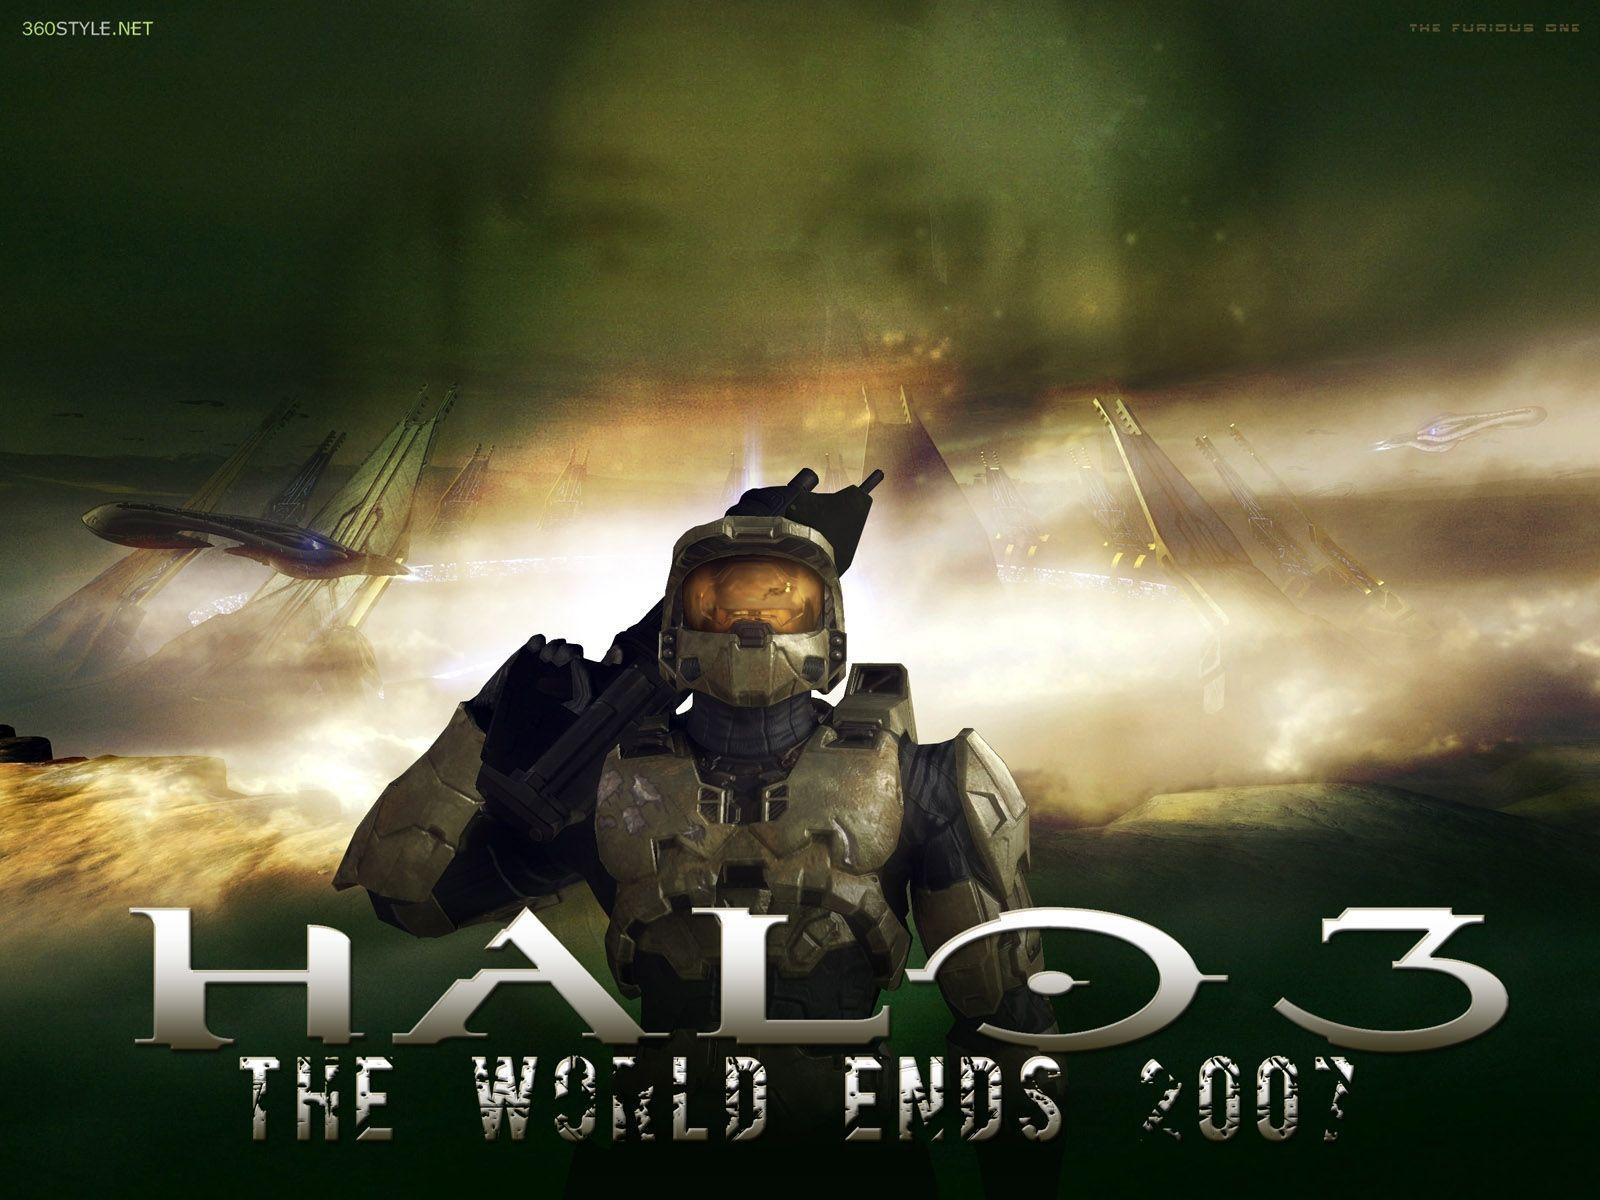 Wallpaper Halo3 04 - Halo 3 Never Forget , HD Wallpaper & Backgrounds